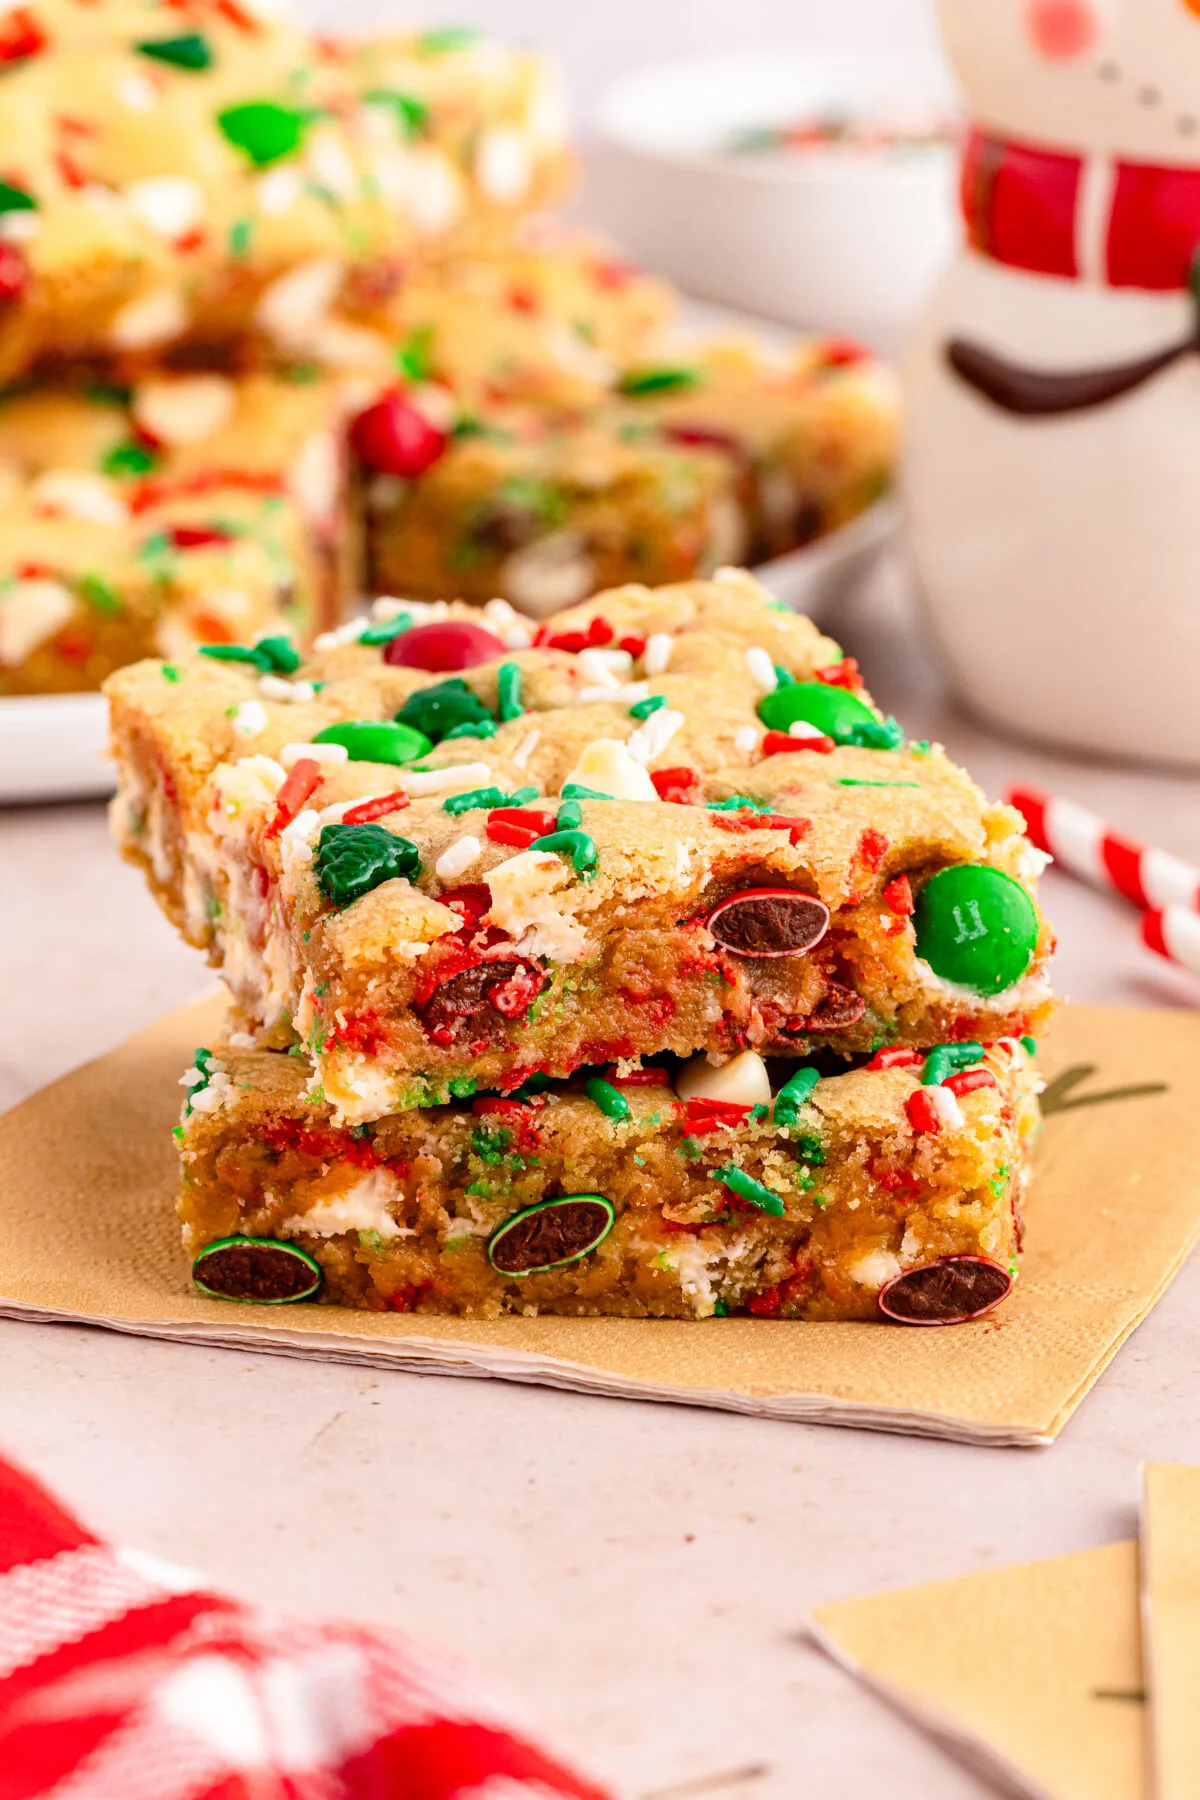 Get into the holiday spirit with these yummy M&M Christmas cookie bars! They're easy, need only basic ingredients, and are sure to be a hit.